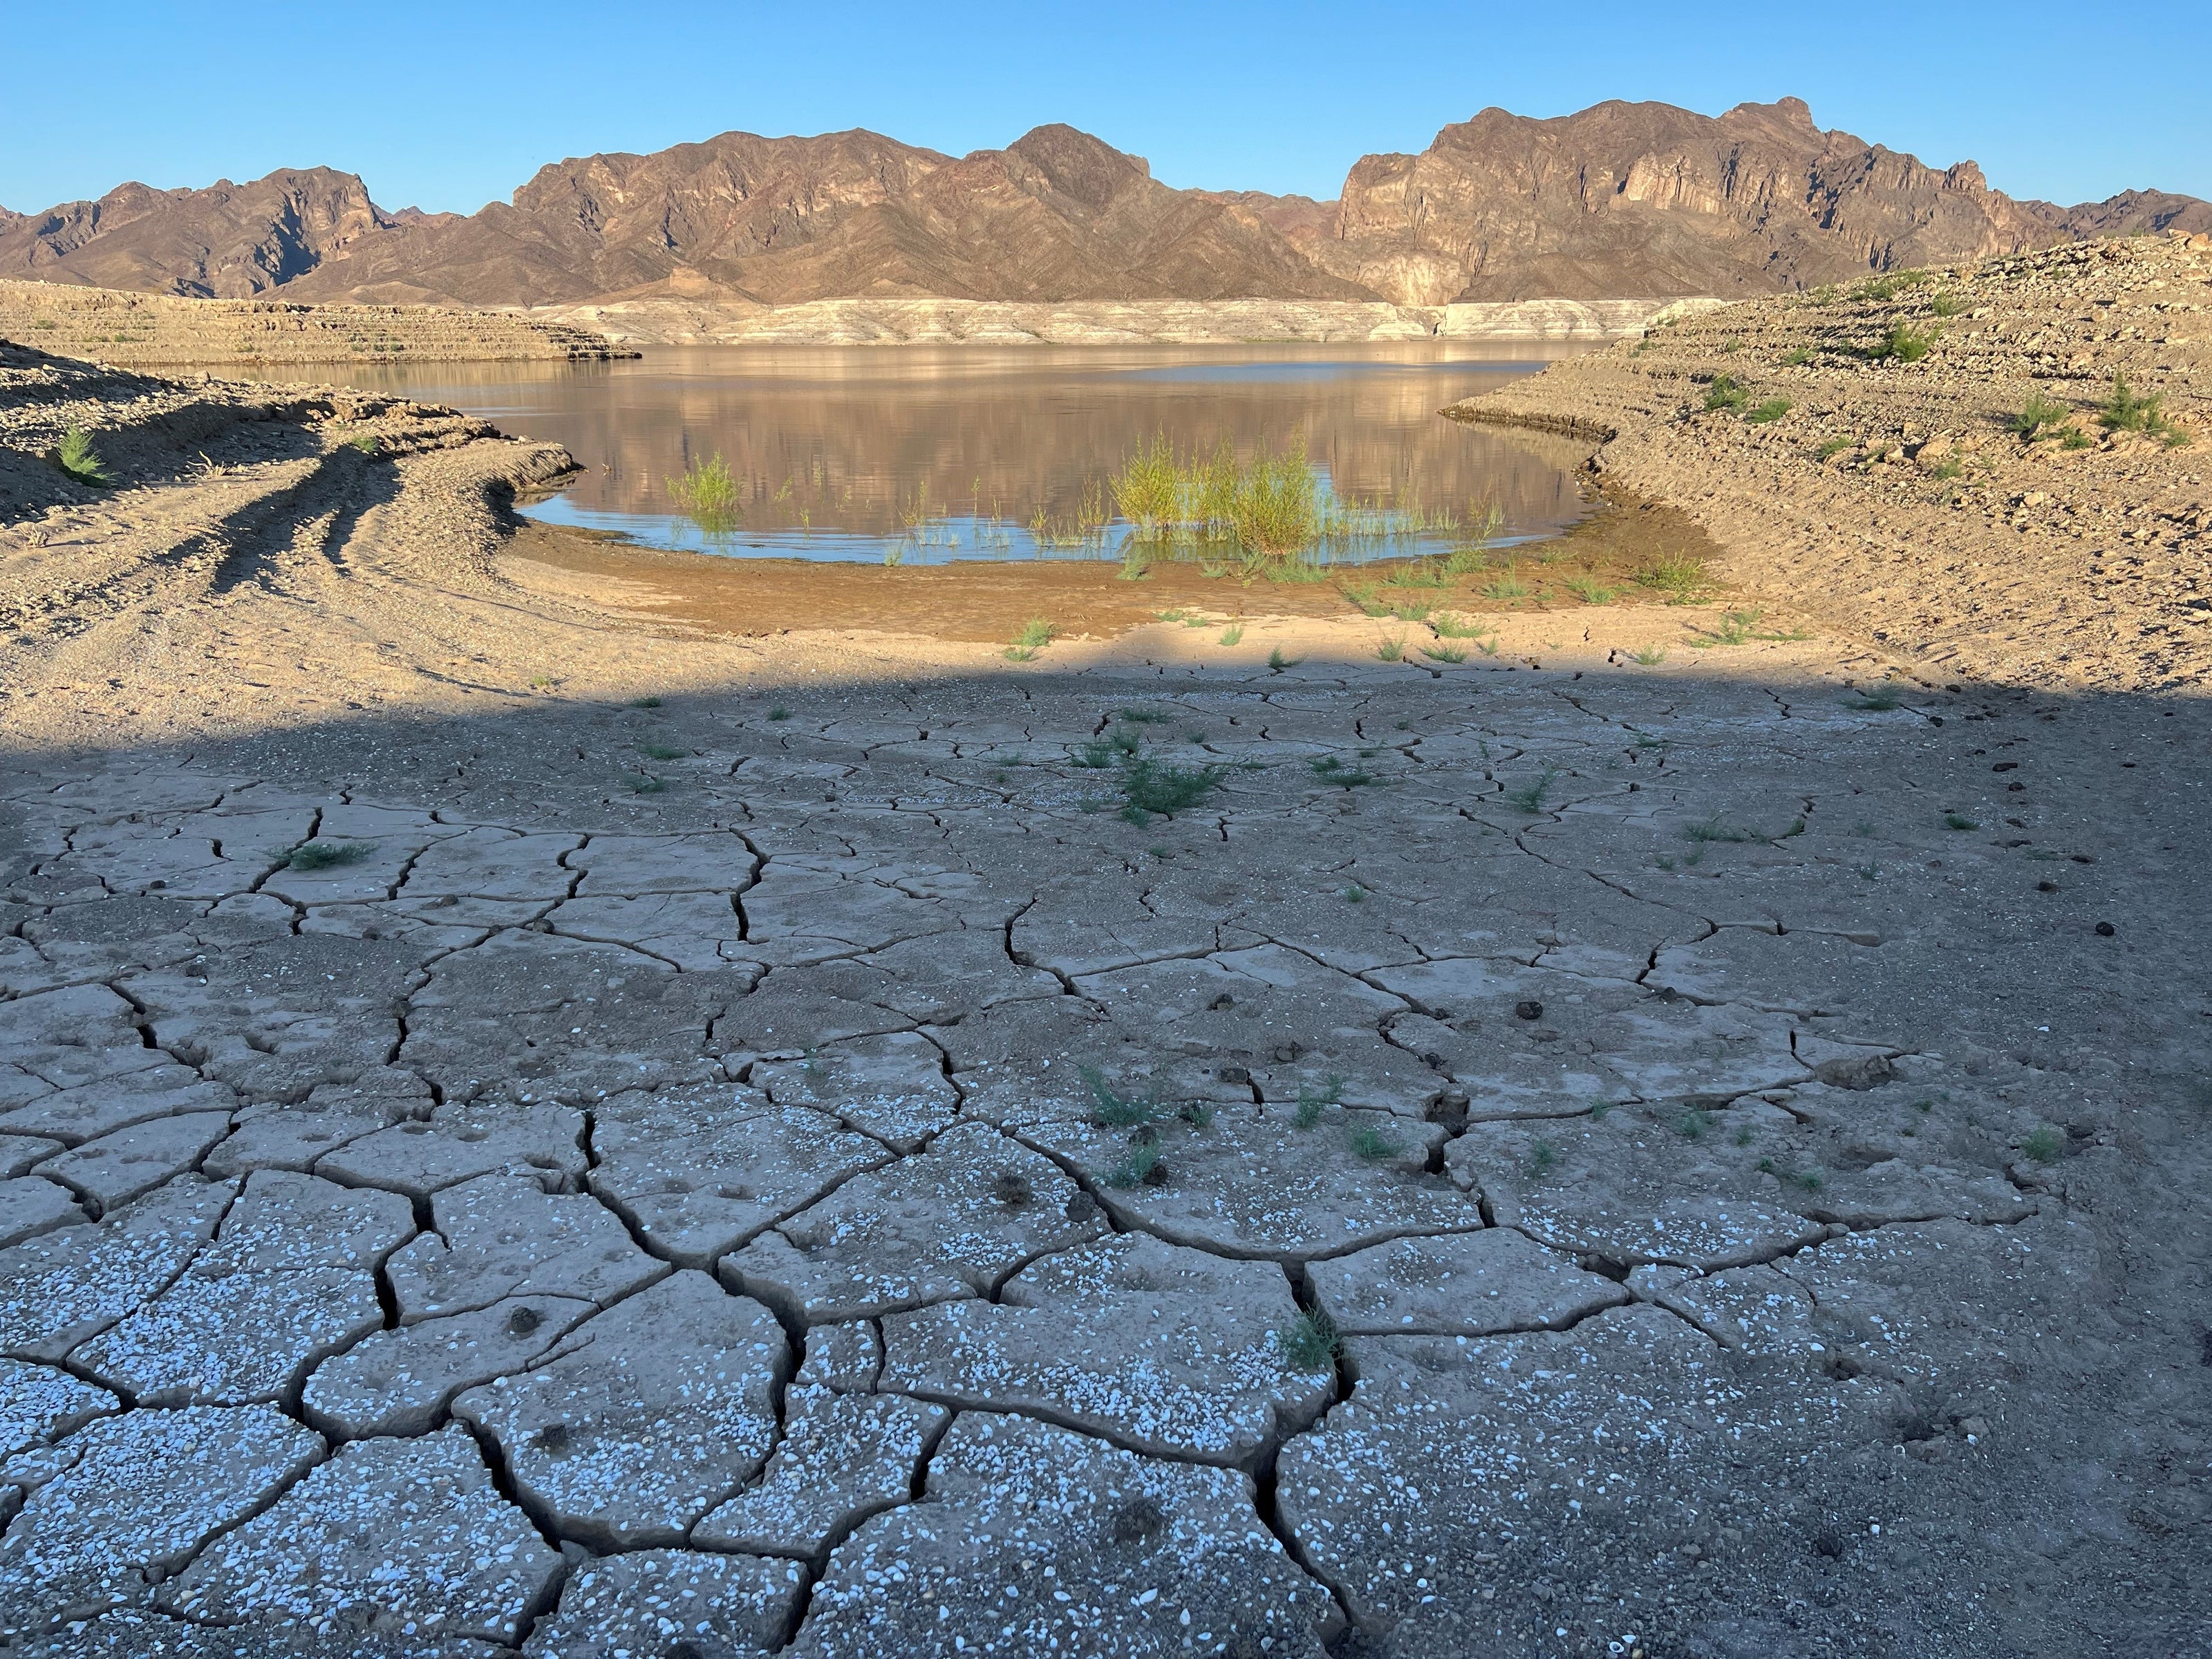 Lake Mead Drying Up - Image